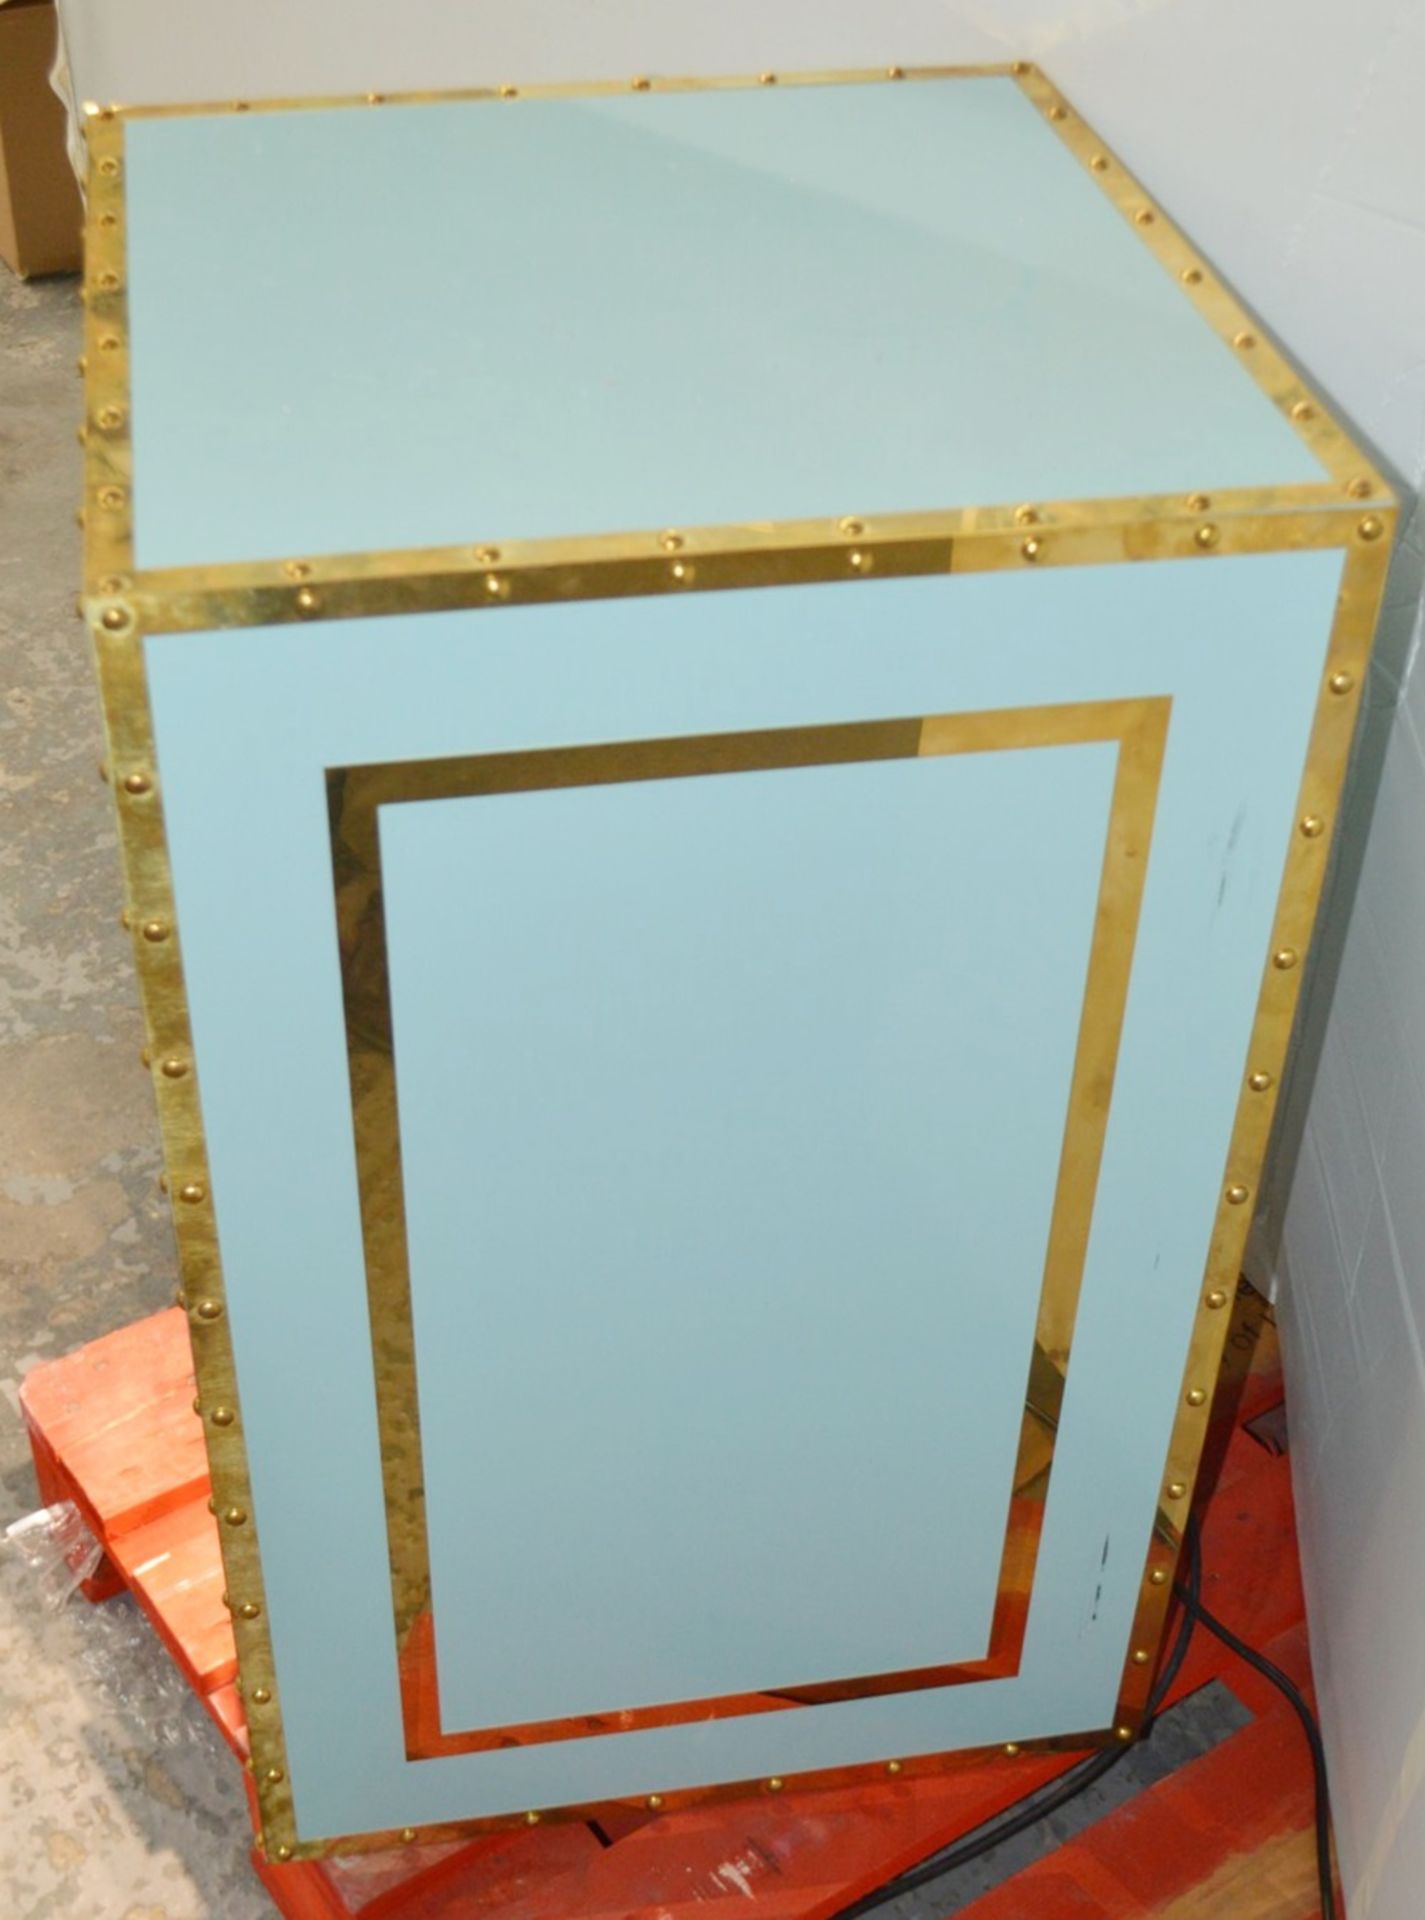 1 x Illuminated Bank Vault Safe-style Mirrored Retail Shop Display Box In Tiffany Blue - Dimensions: - Image 2 of 5